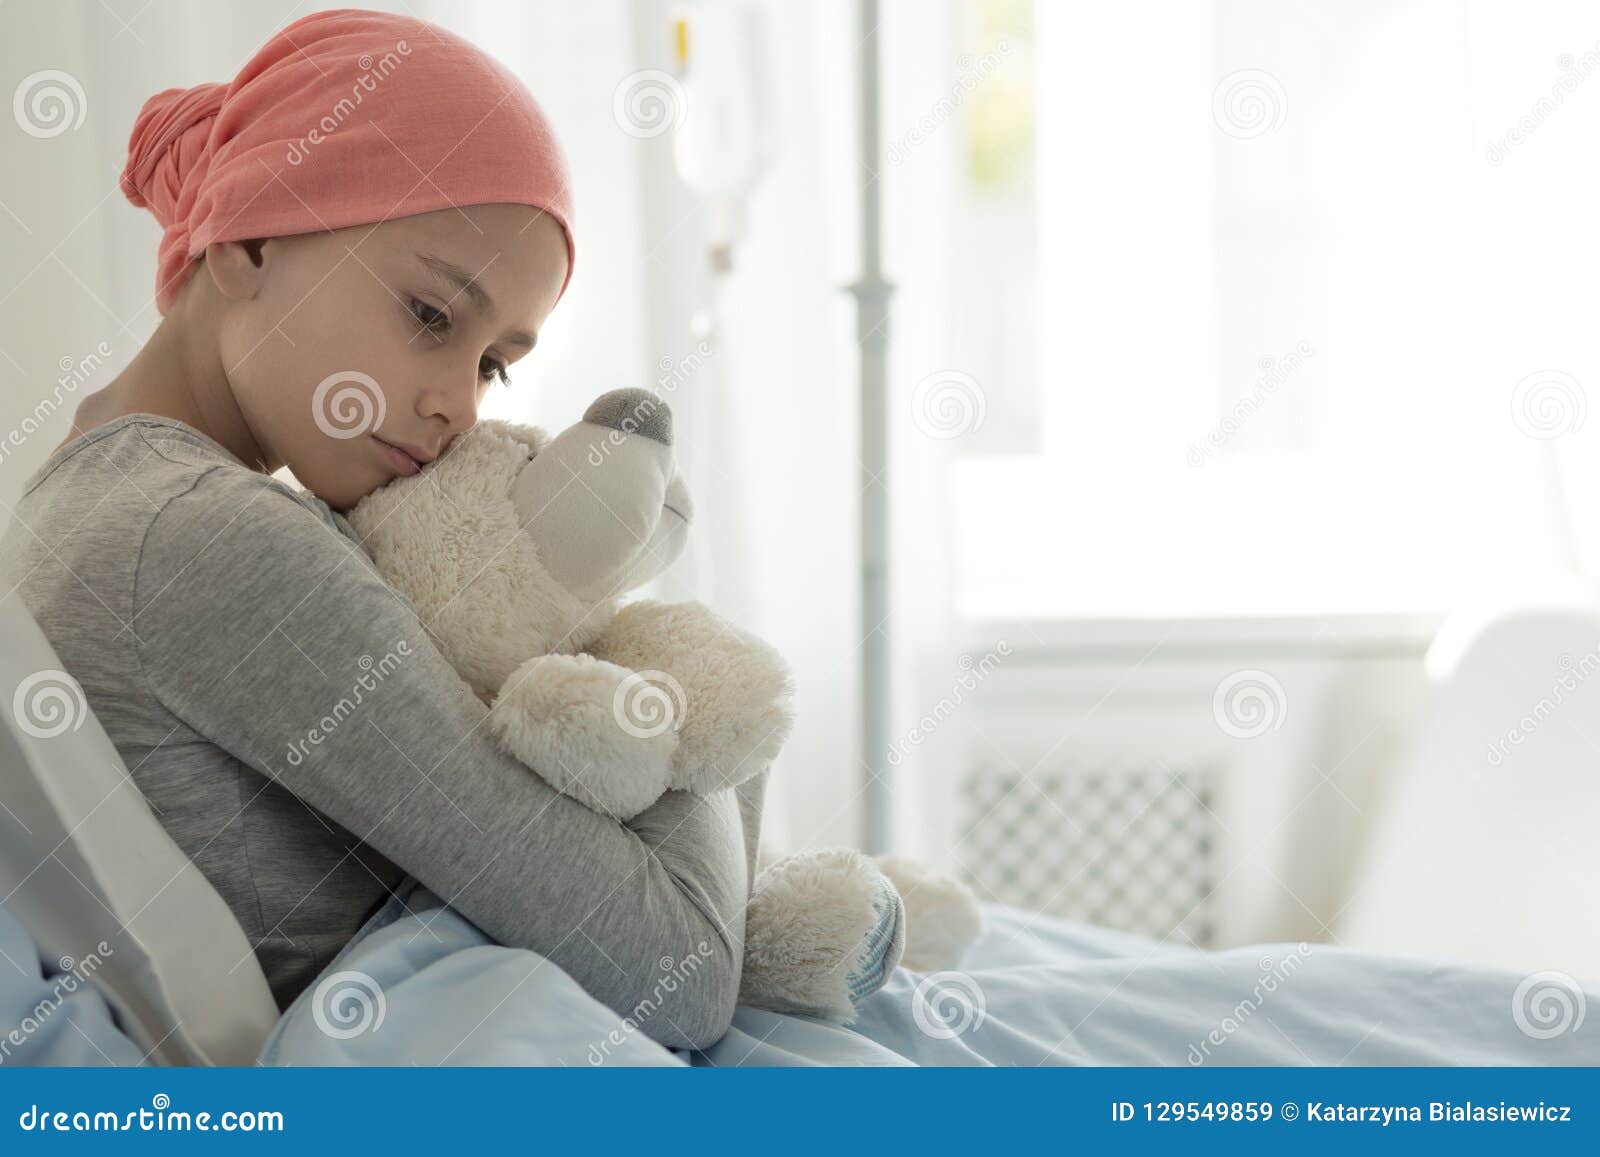 weak girl with cancer wearing pink headscarf and hugging teddy bear